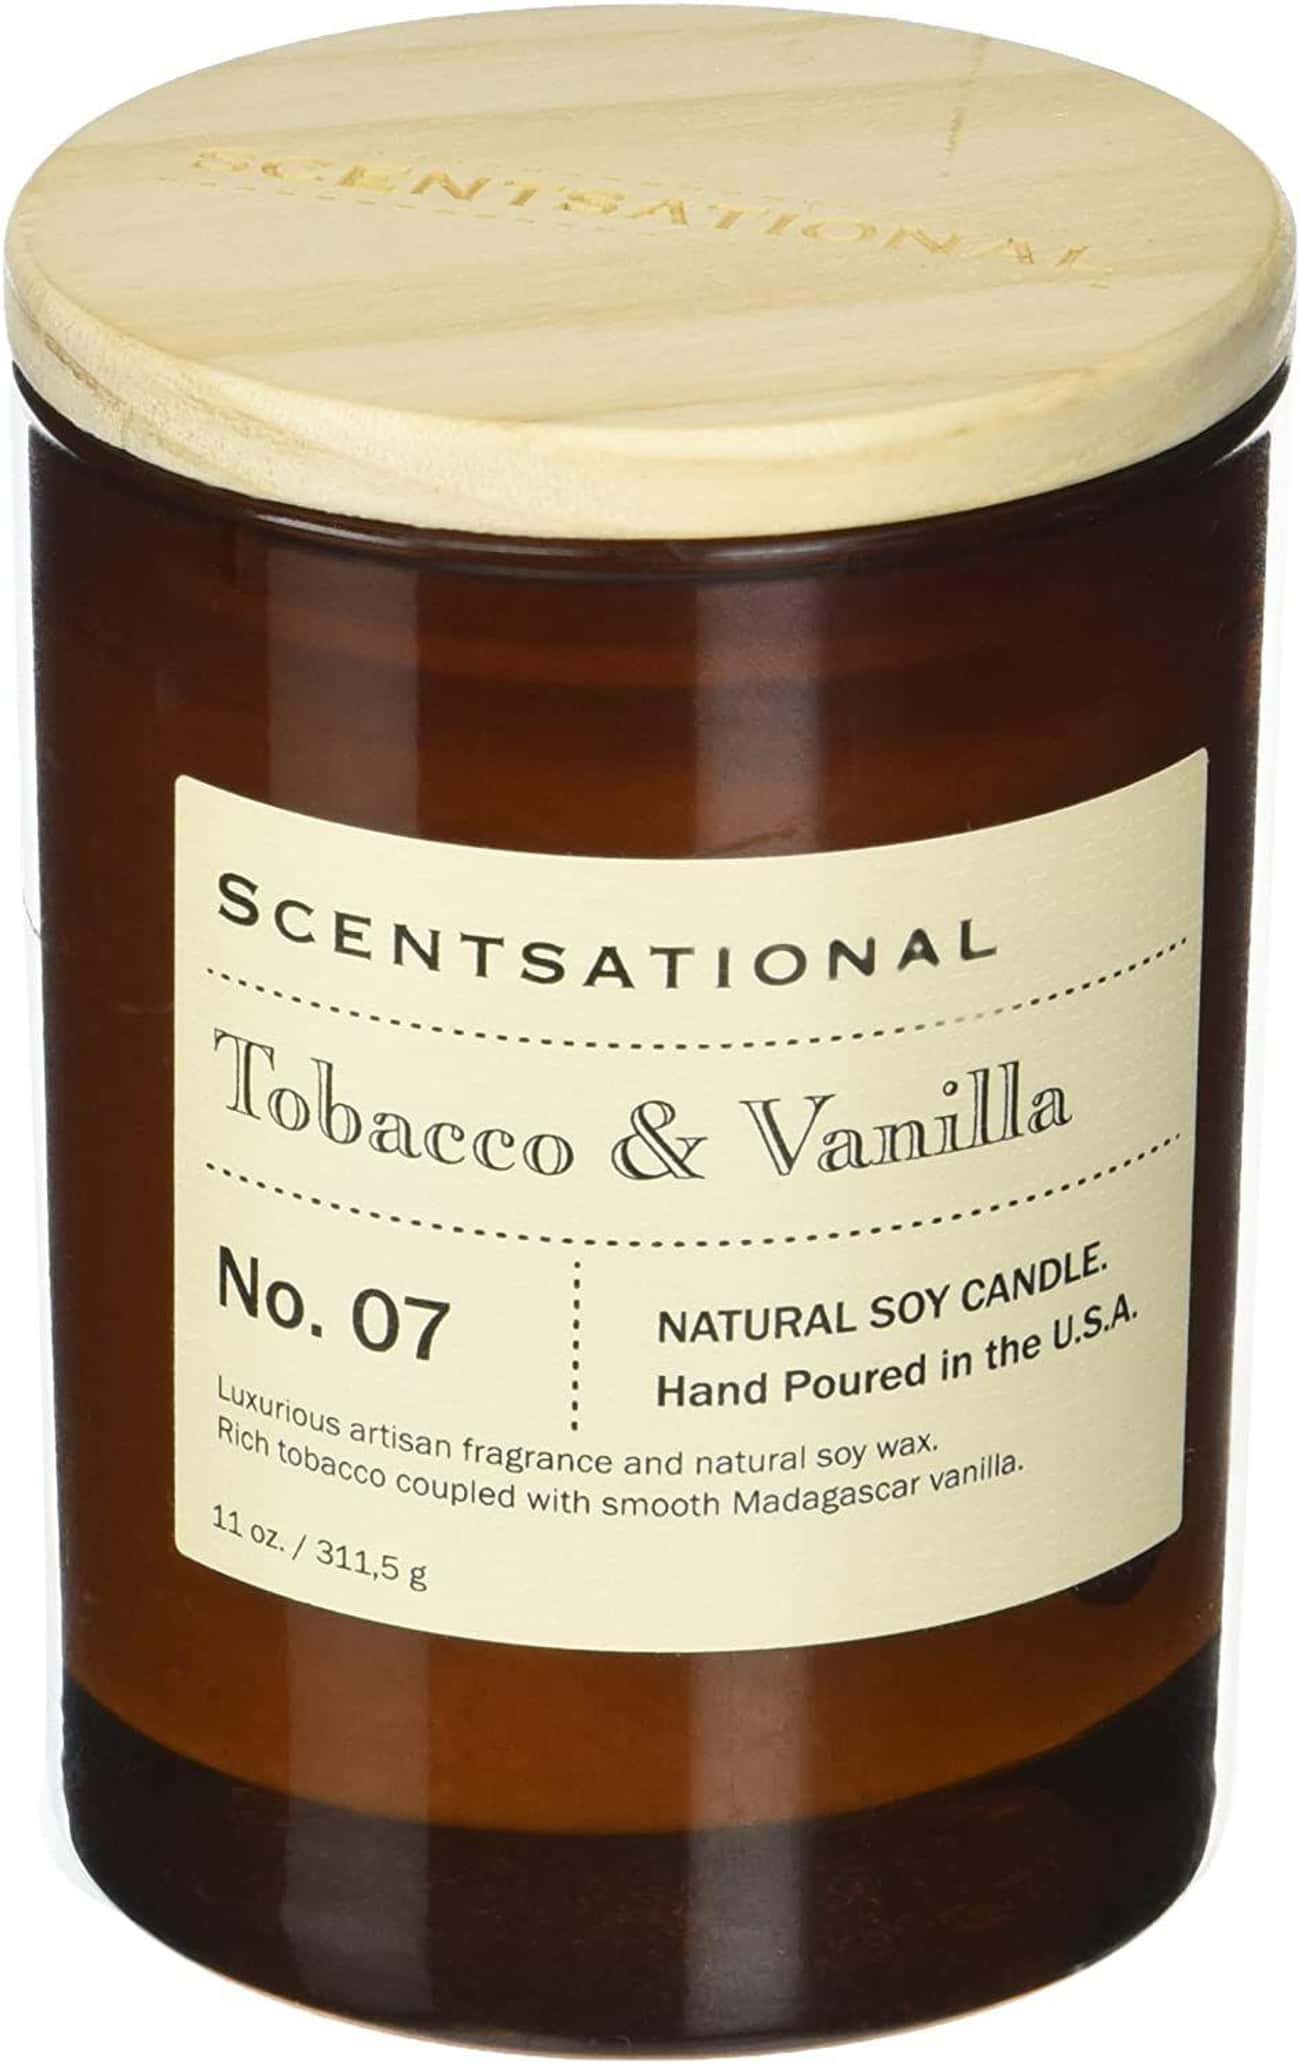 Scentsational Apothecary - Tobacco & Vanilla Candle